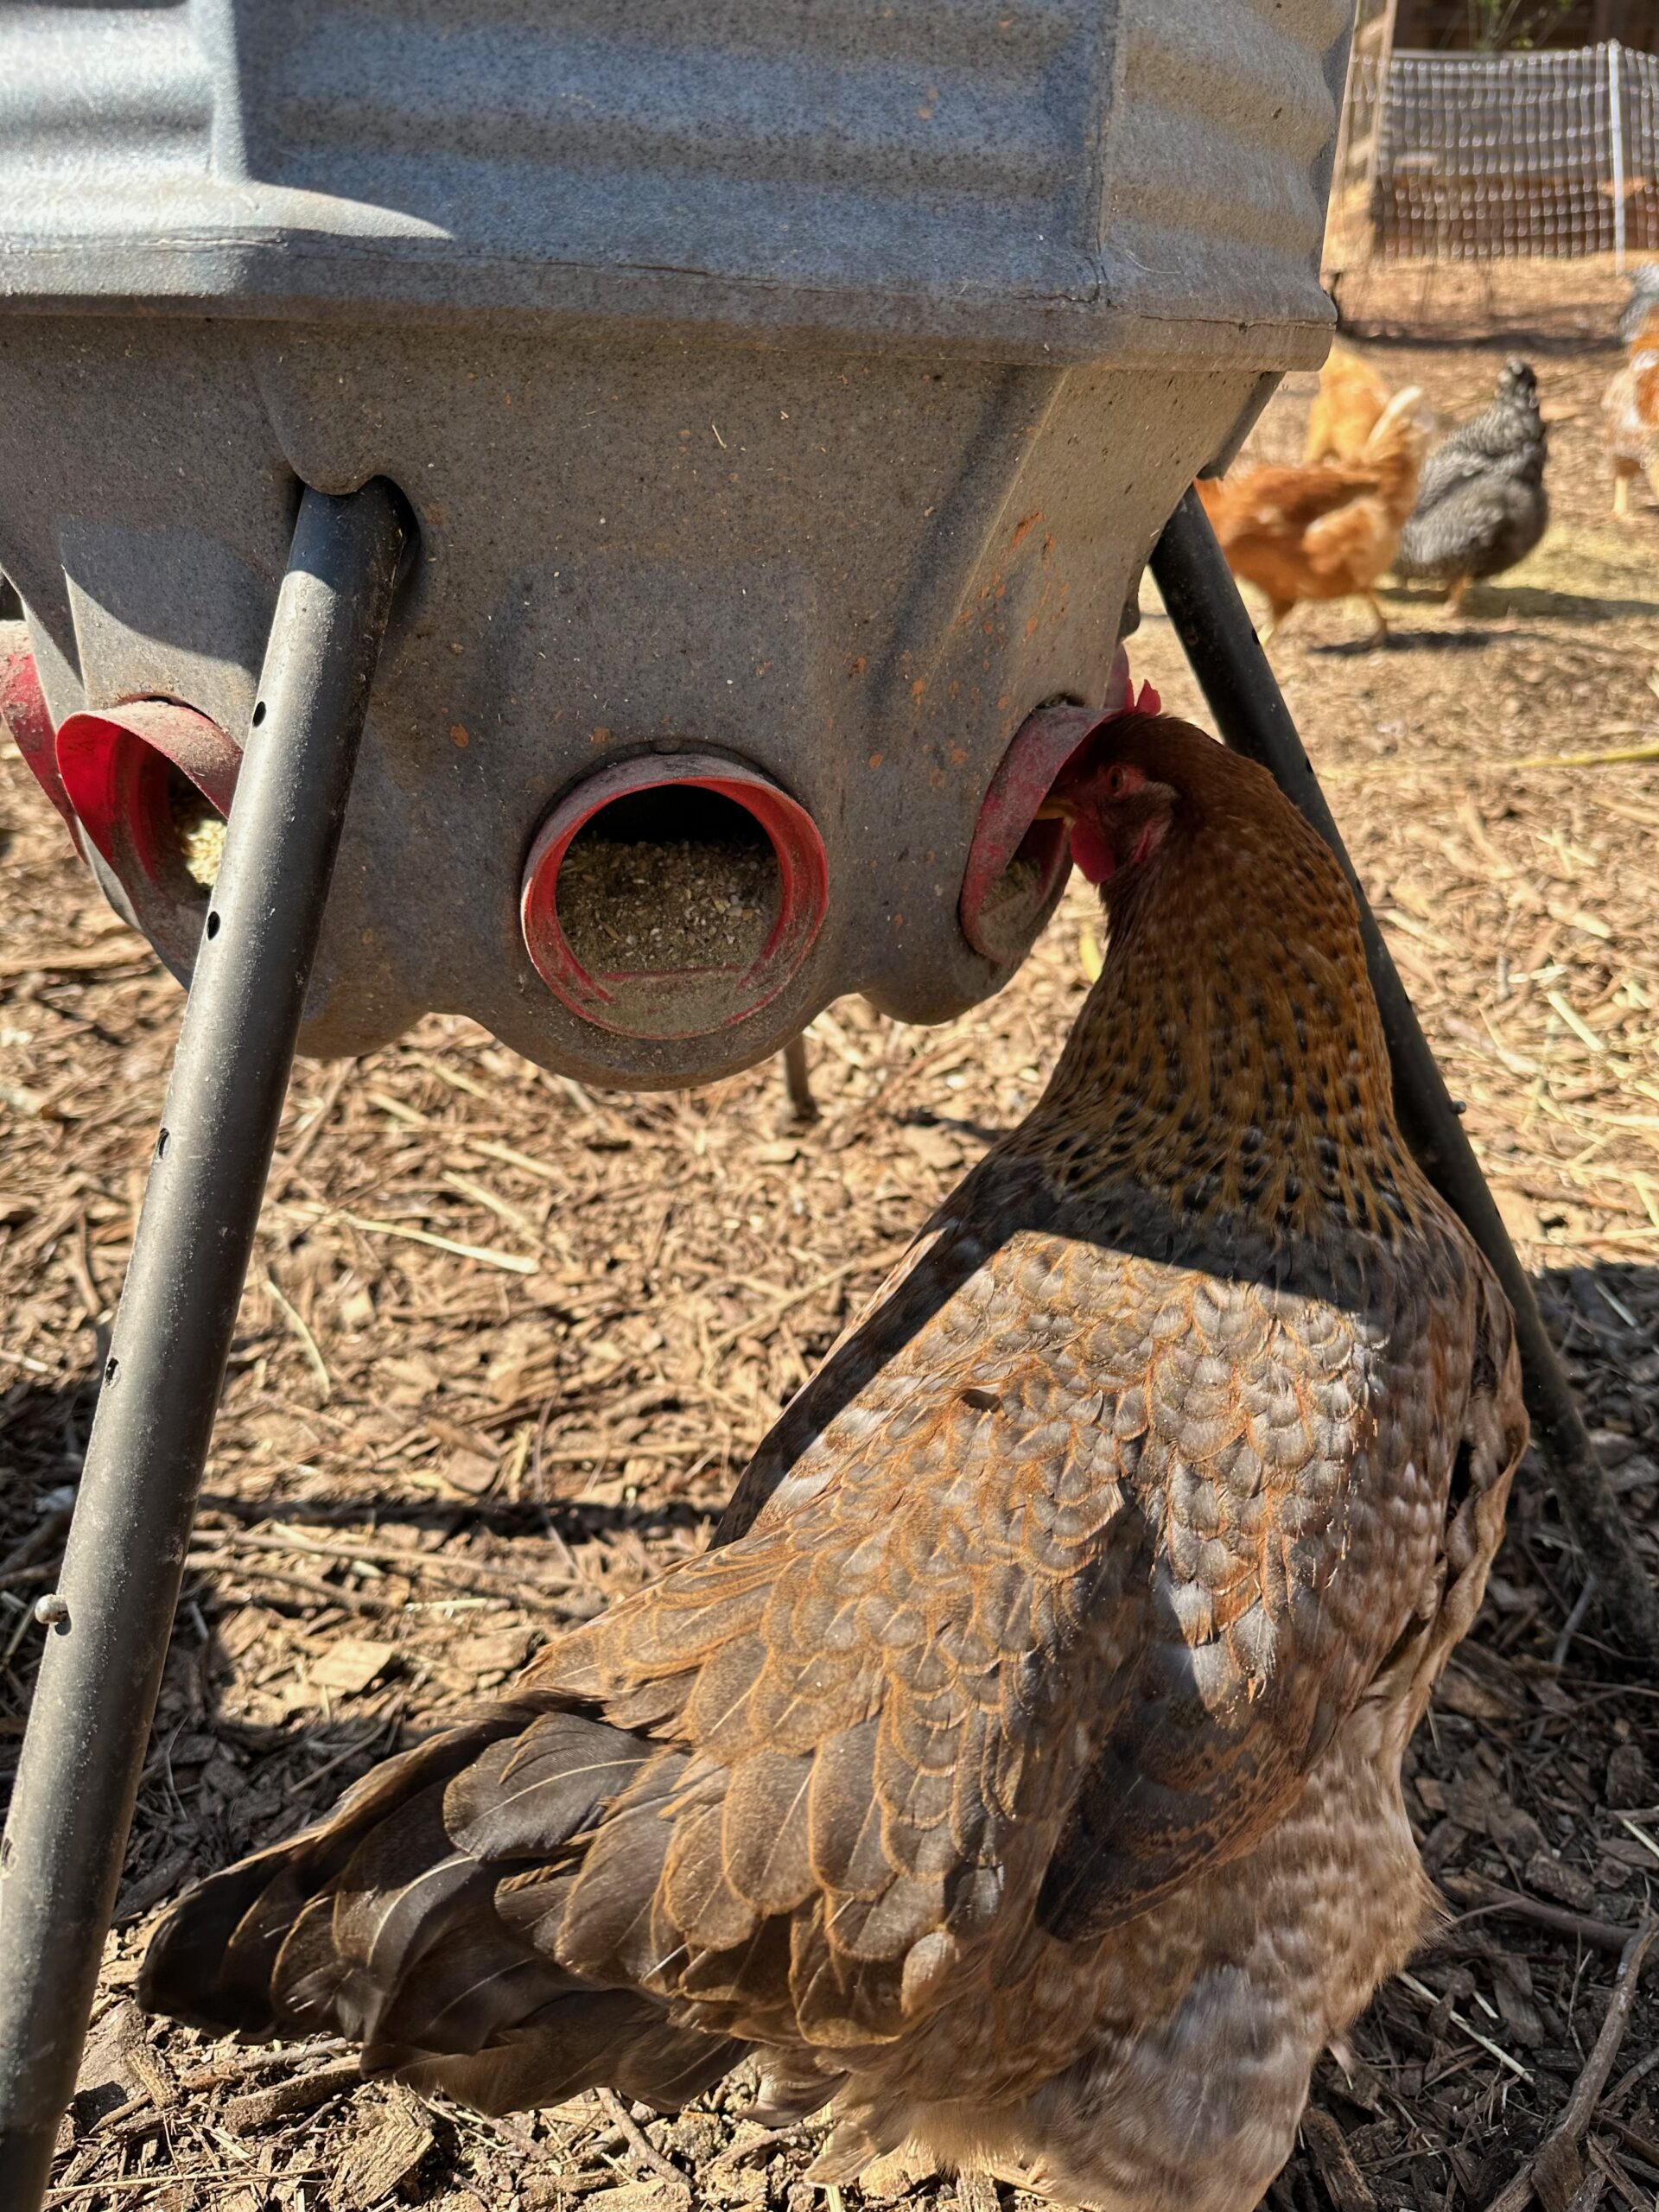 CoopWorx reduces feed waste because the hens have to stick their heads inside the feed ports to access the feed